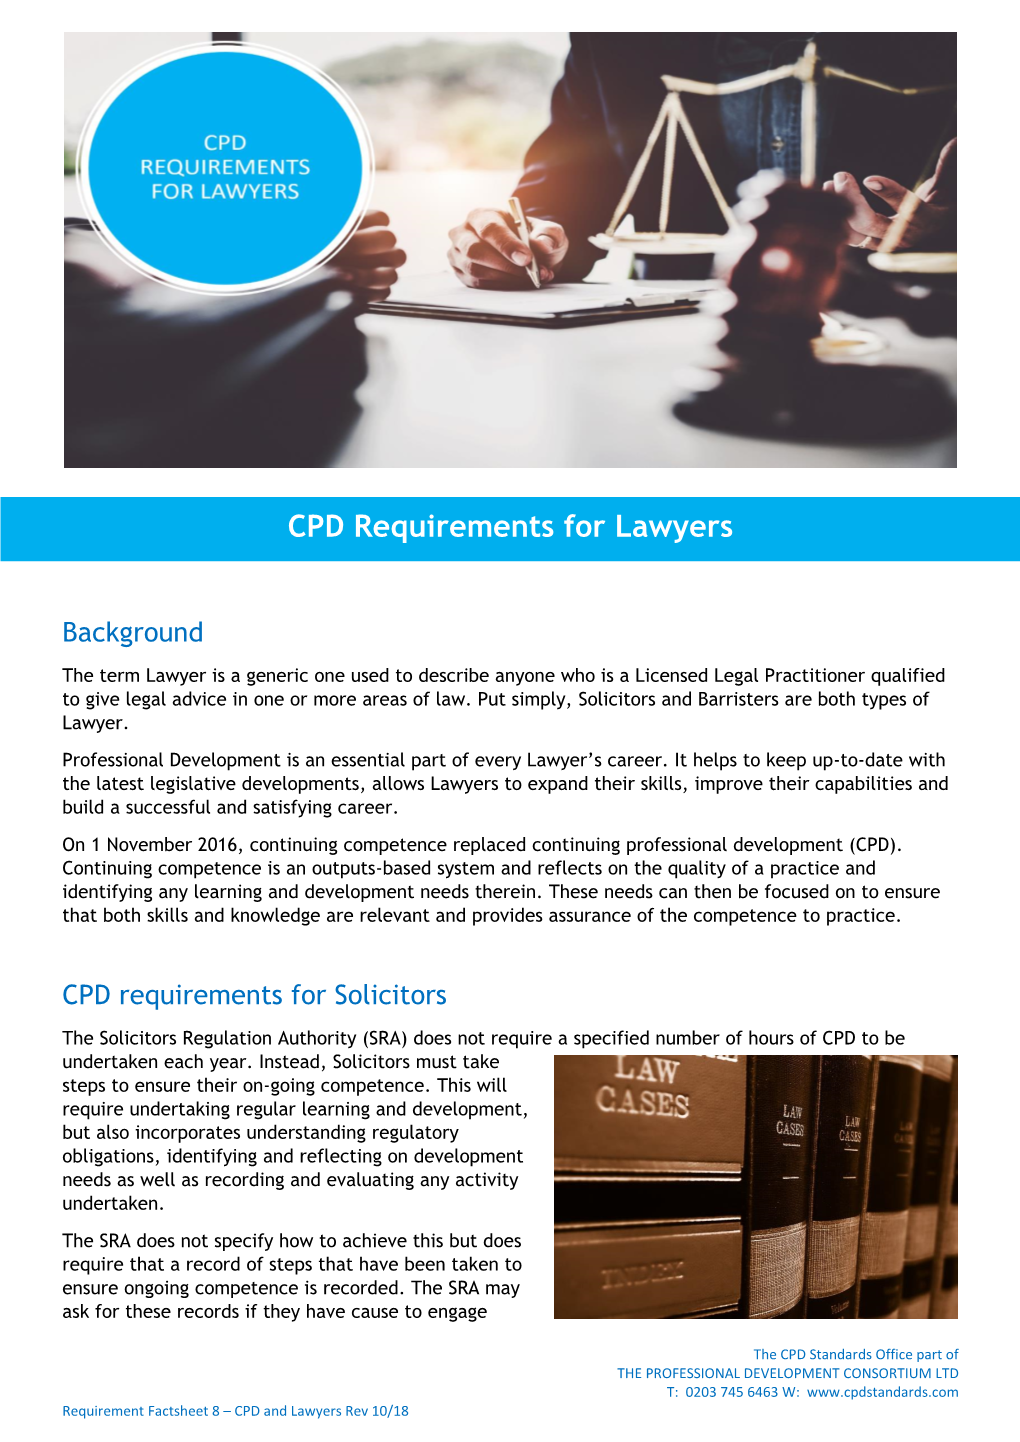 CPD Requirements for Lawyers